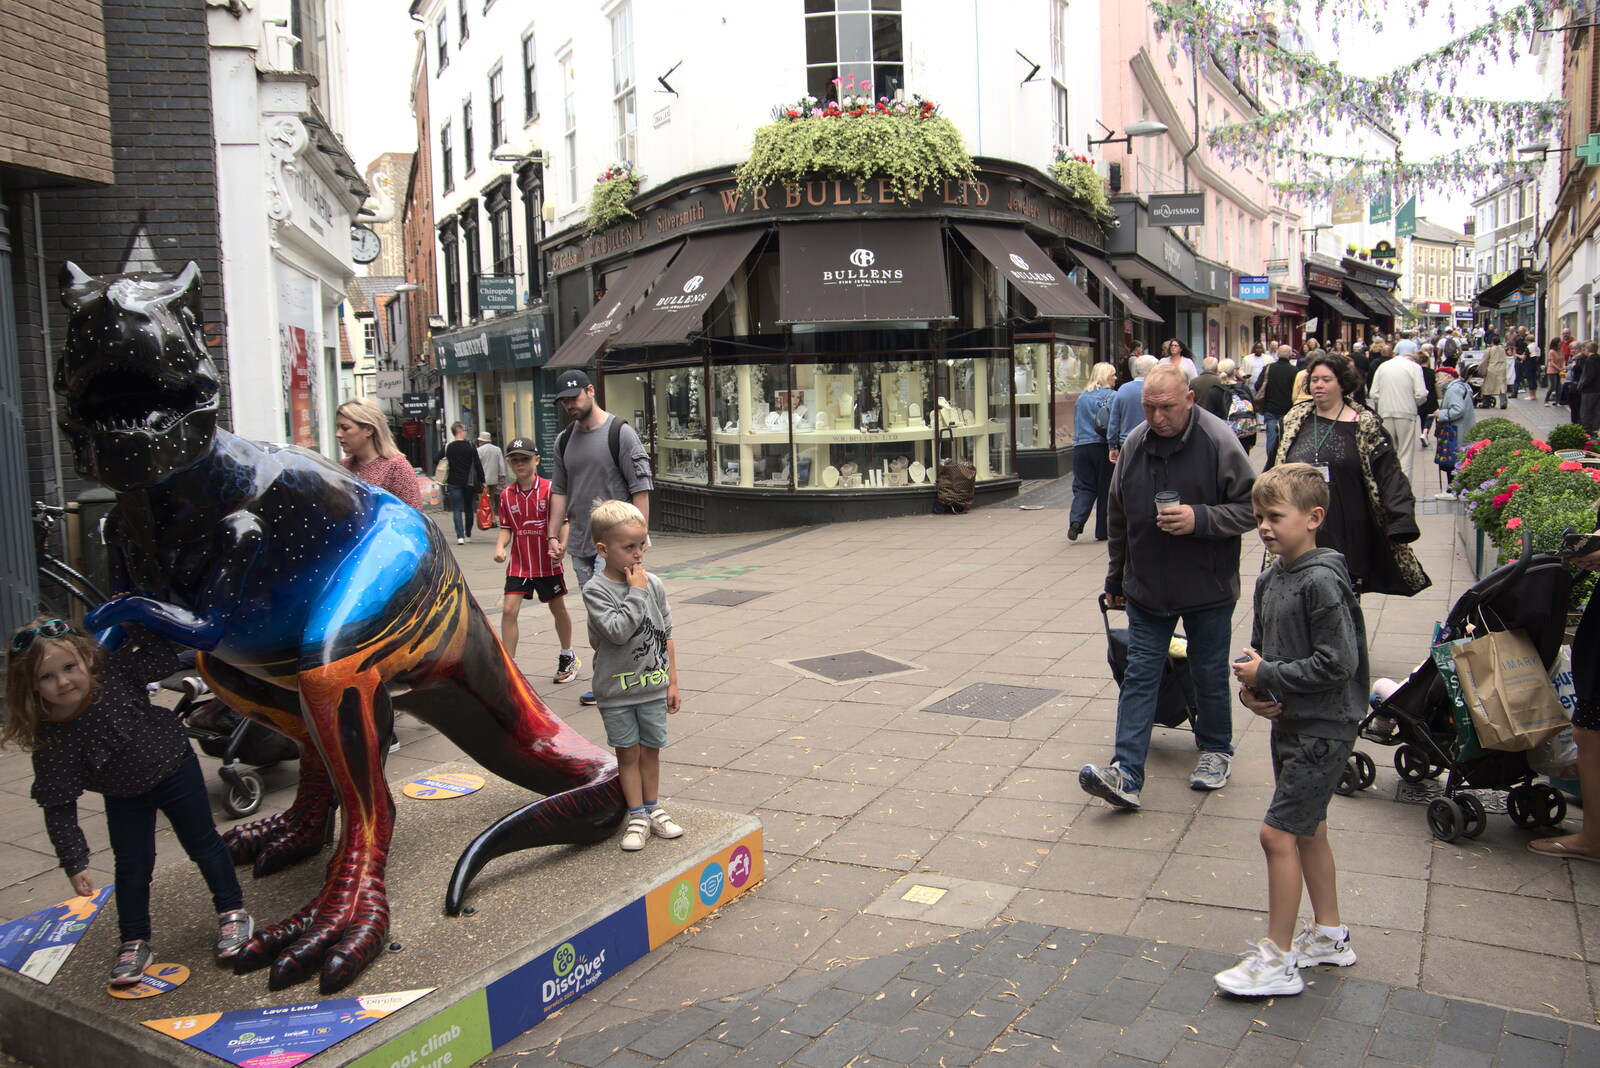 Photos with the dinosaur from Dippy and the City Dinosaur Trail, Norwich, Norfolk - 19th August 2021